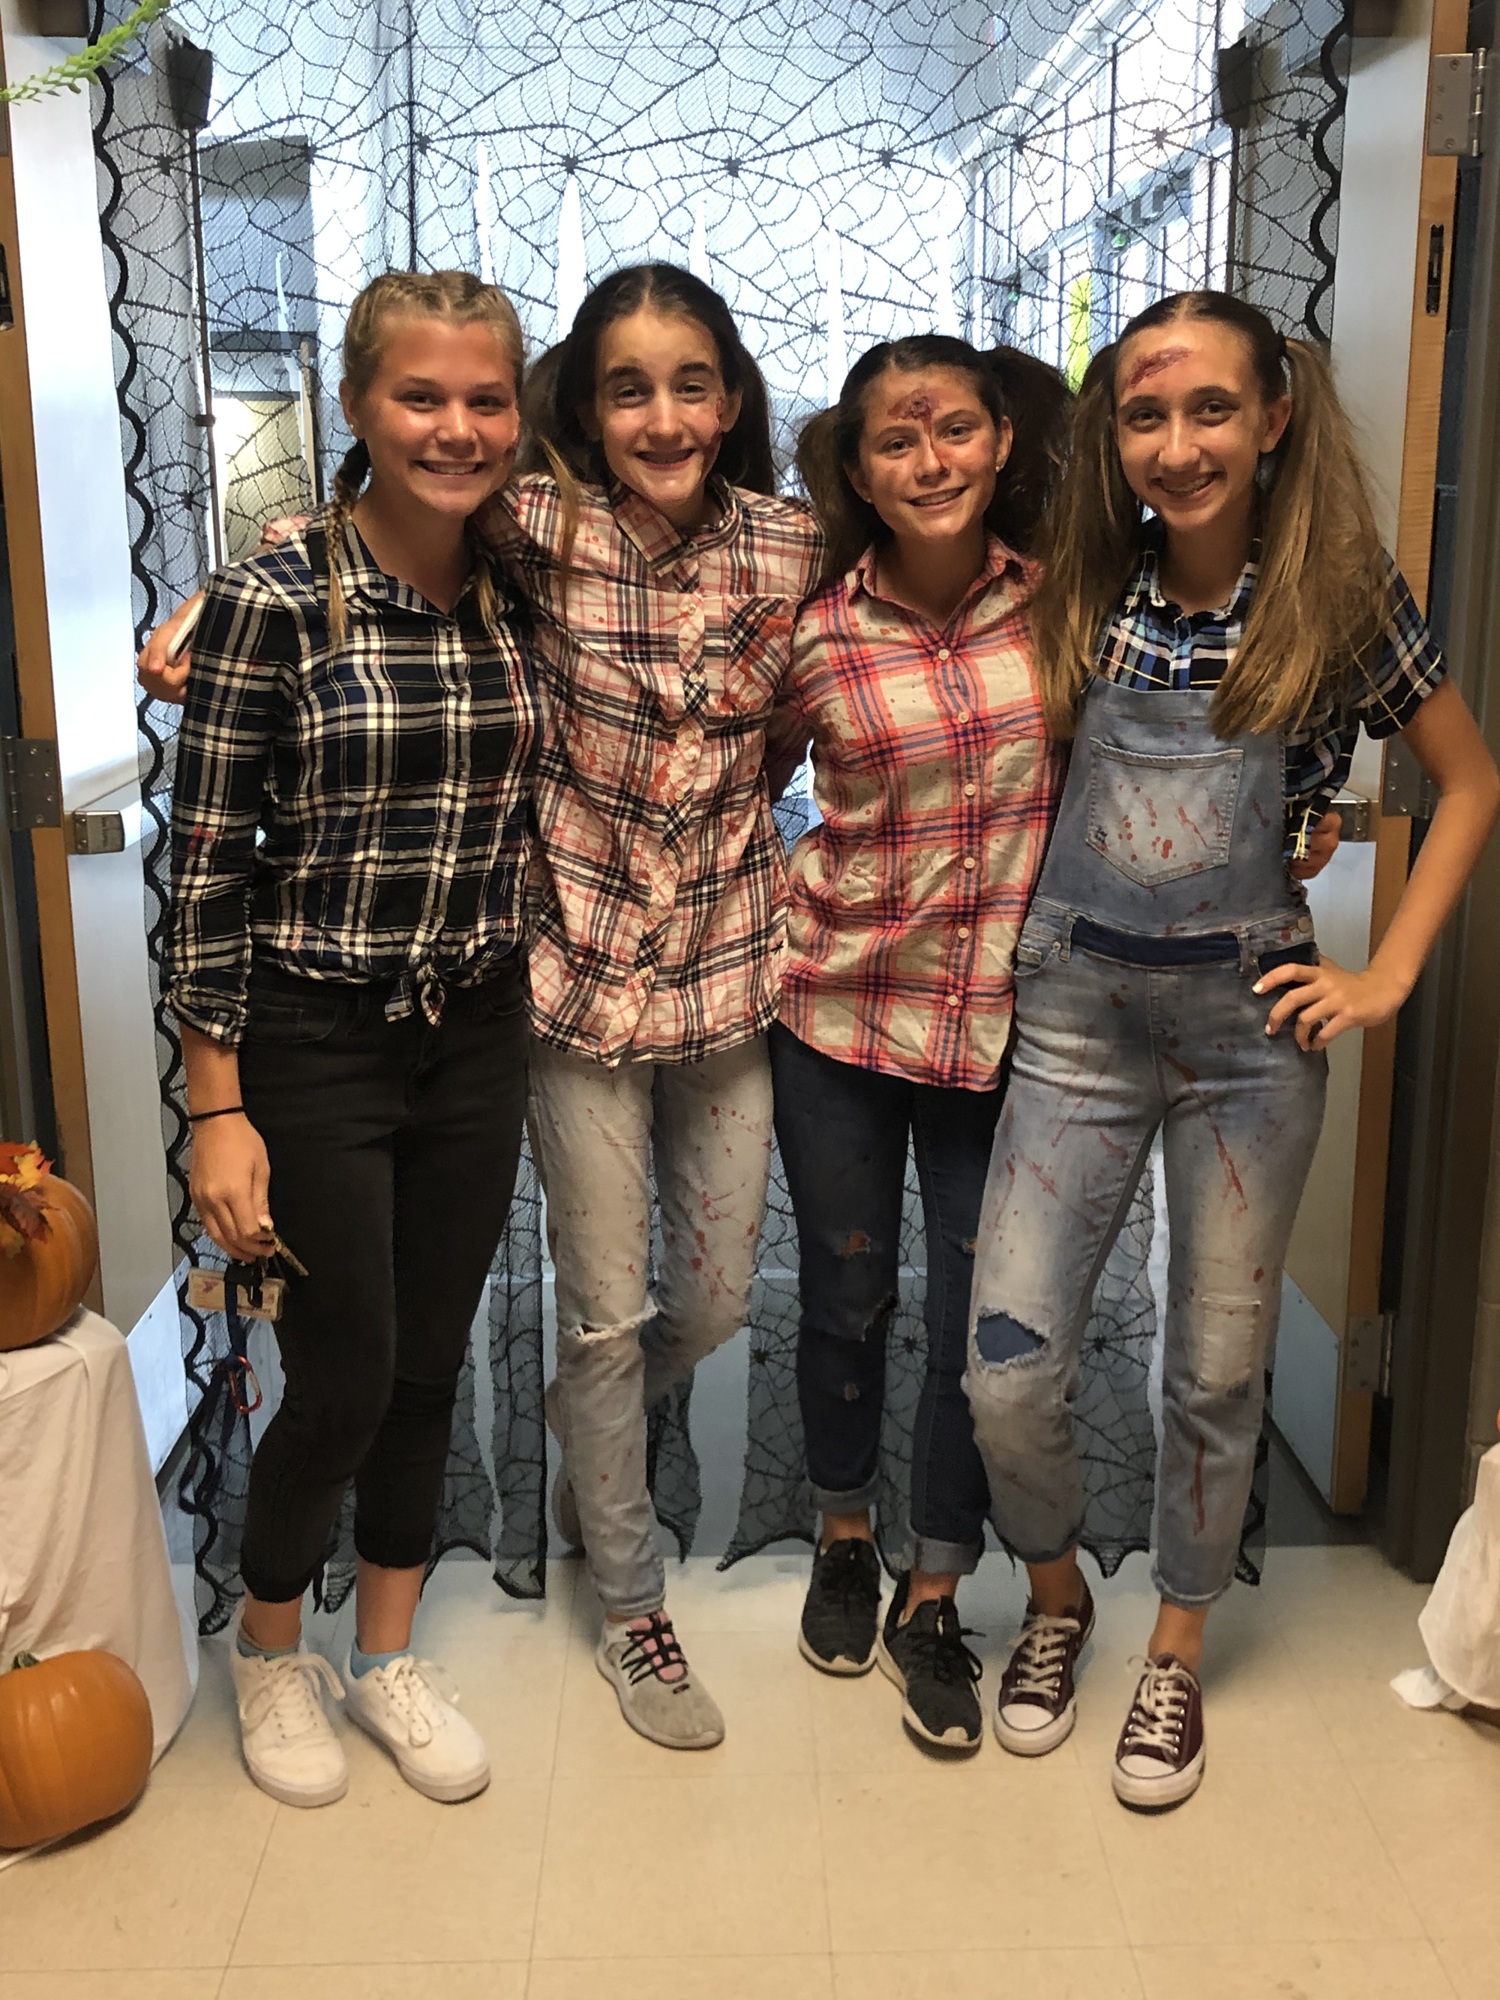 Former Nolan Middle School students Amy Zona, Olivia Sharkoski, Sara Zona and Alexa Tzelepis are ready to scare people at the school's haunted house in 2019. (Courtesy photo)